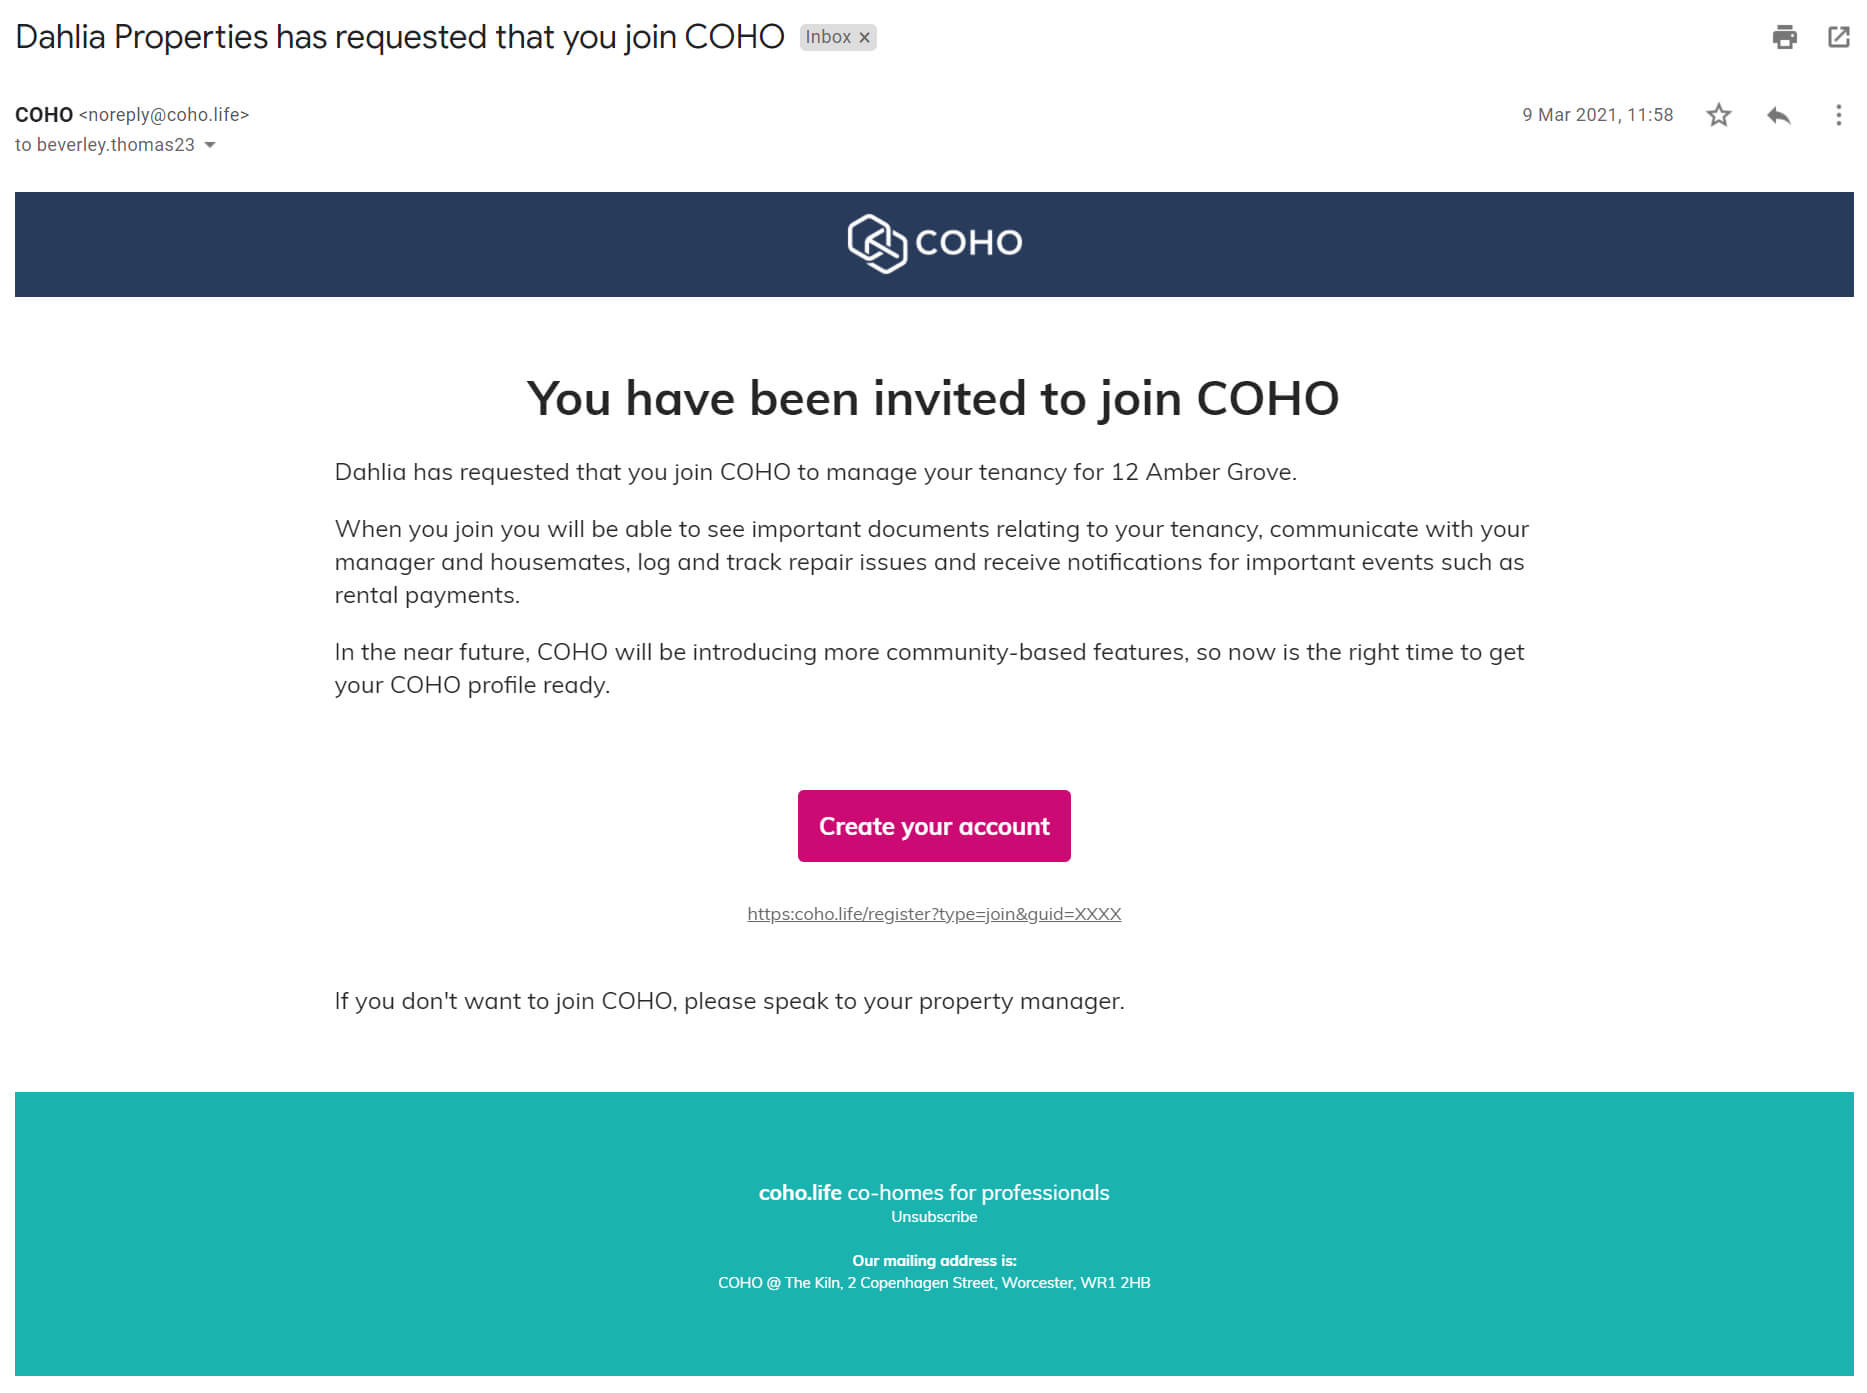 Screenshot of email from COHO inviting a tenant to Join